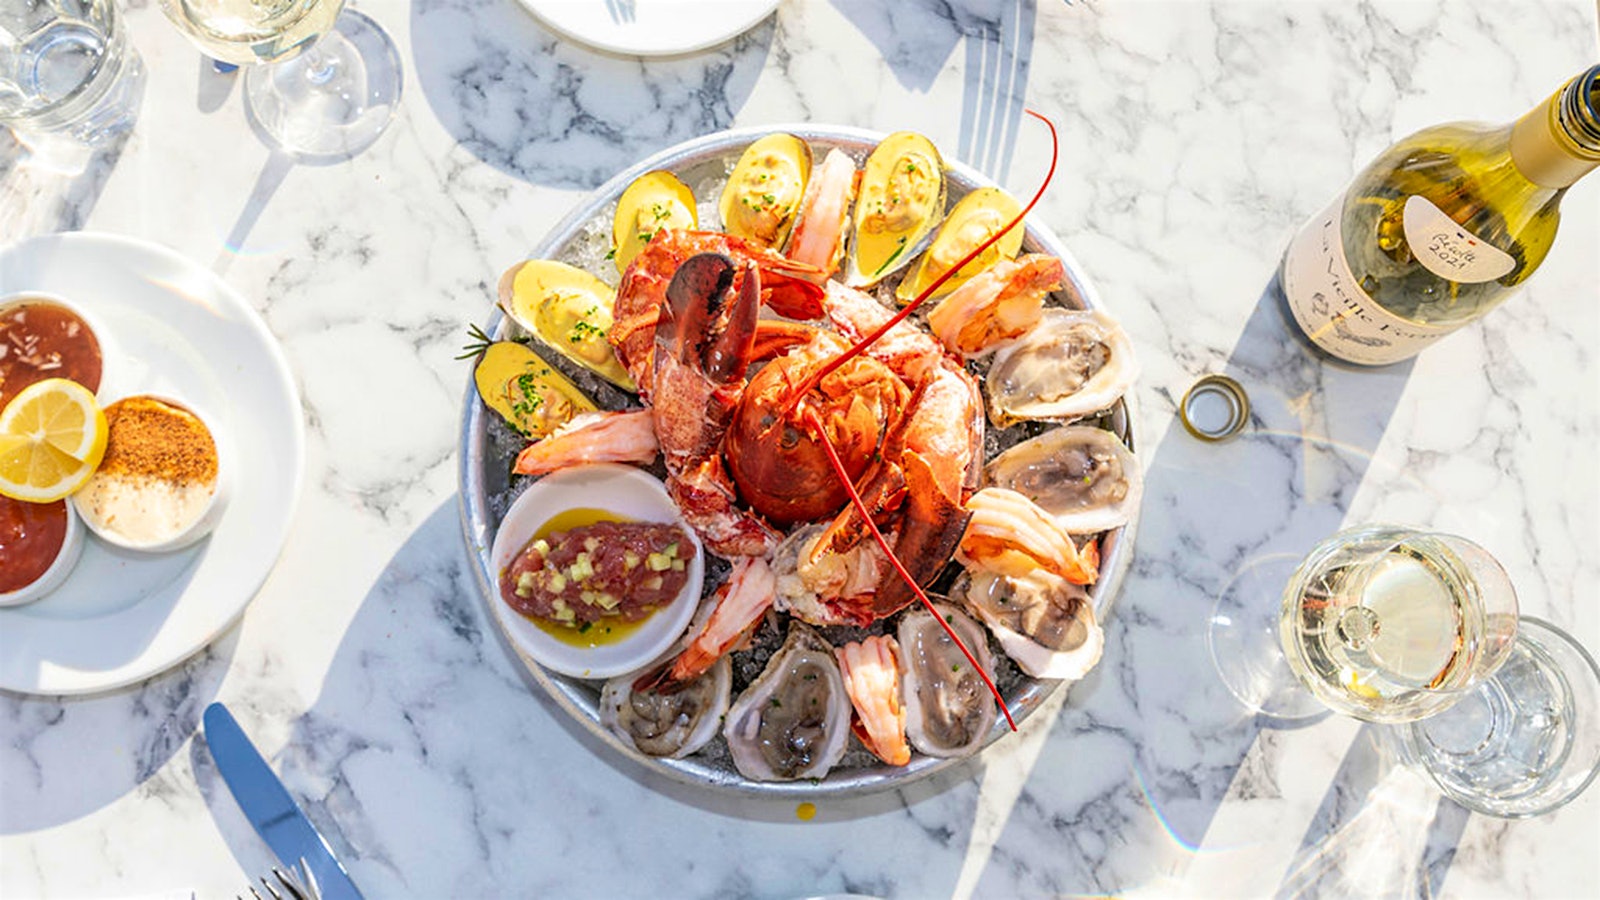  Left Bank Brasserie's shellfish platter, with lobster in the center surrounded by raw oysters, on a white marble tabletop accompanied by glasses and a bottle of white wine